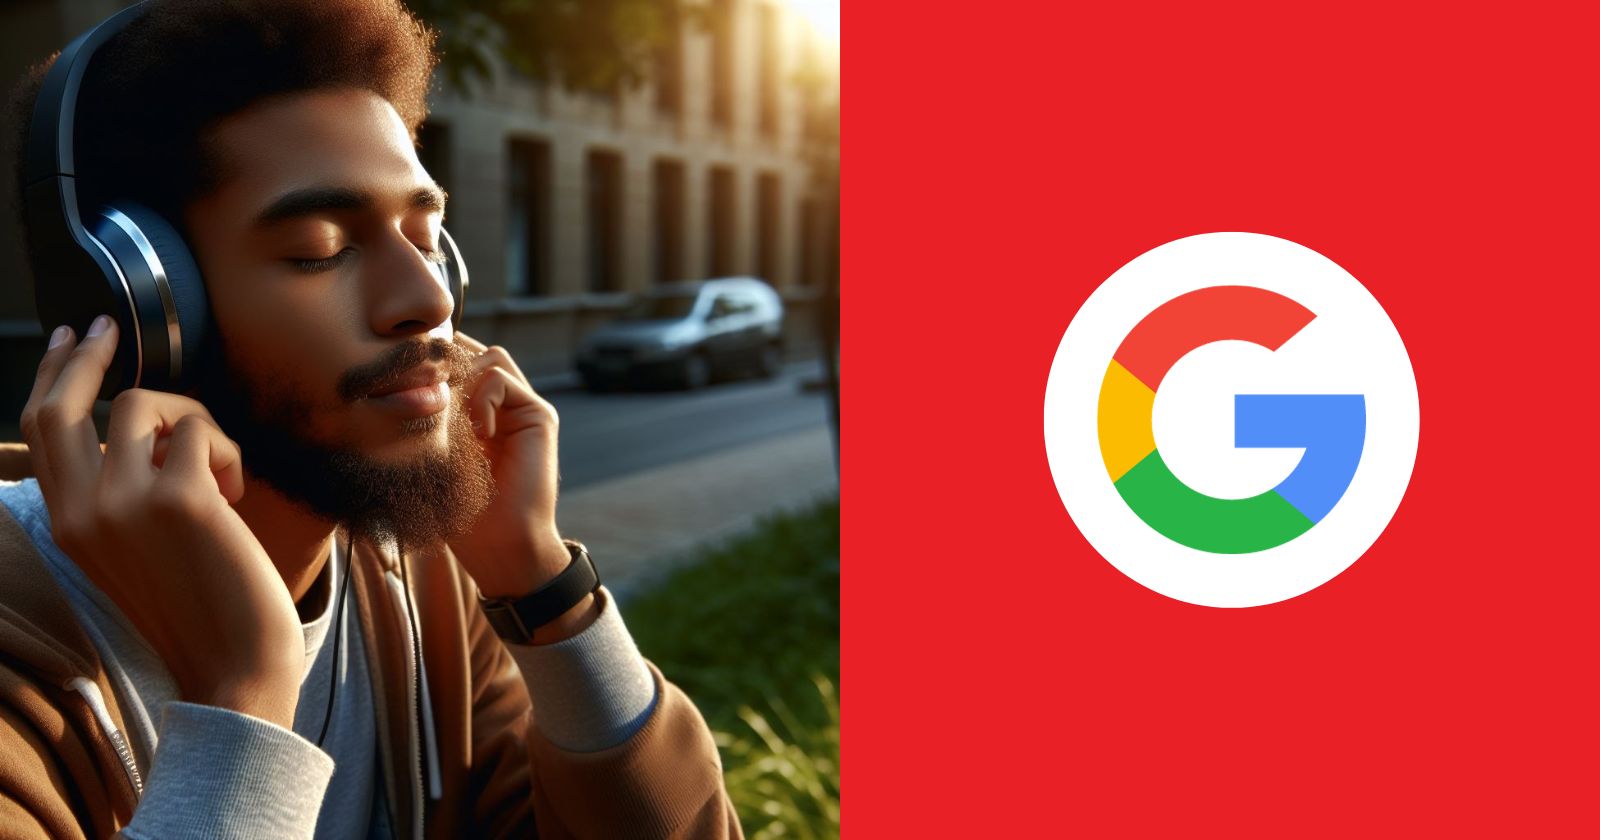 How to enable Spatial Audio on your Google Pixel phone